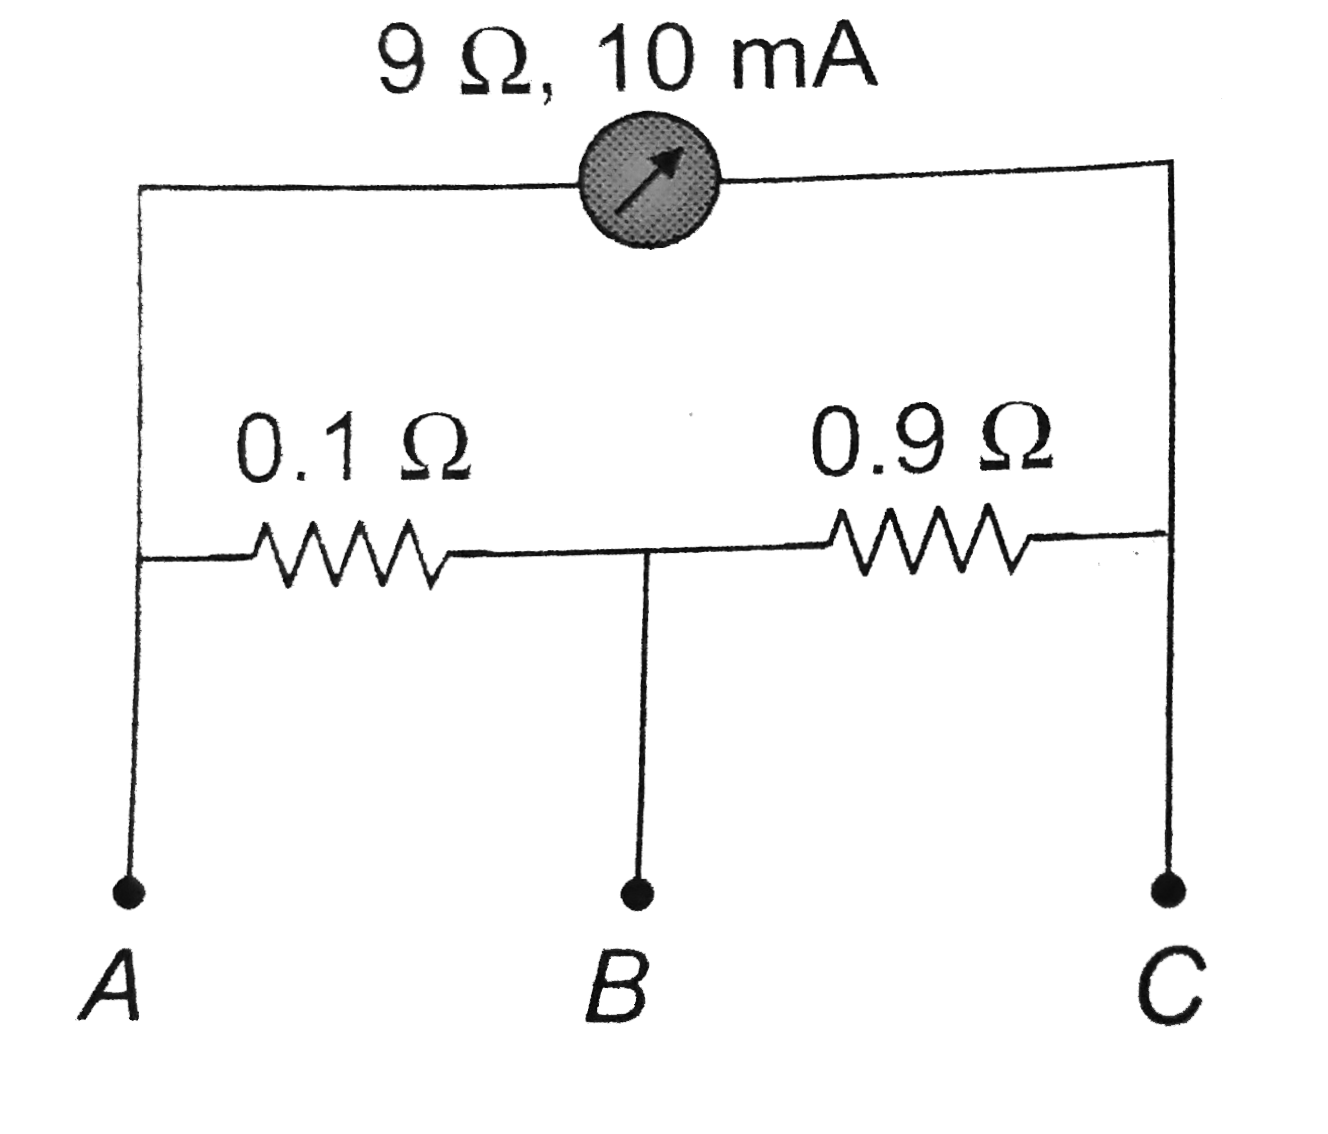 A milliammeter of range 10 mA and resistance 9 Omega is joined in a circuit as shown. The meter gives full-scale deflection for curretn I when A and B are used as its terminals, i.e., current enters at A and leaves at B (C is left isolated). The value if I is